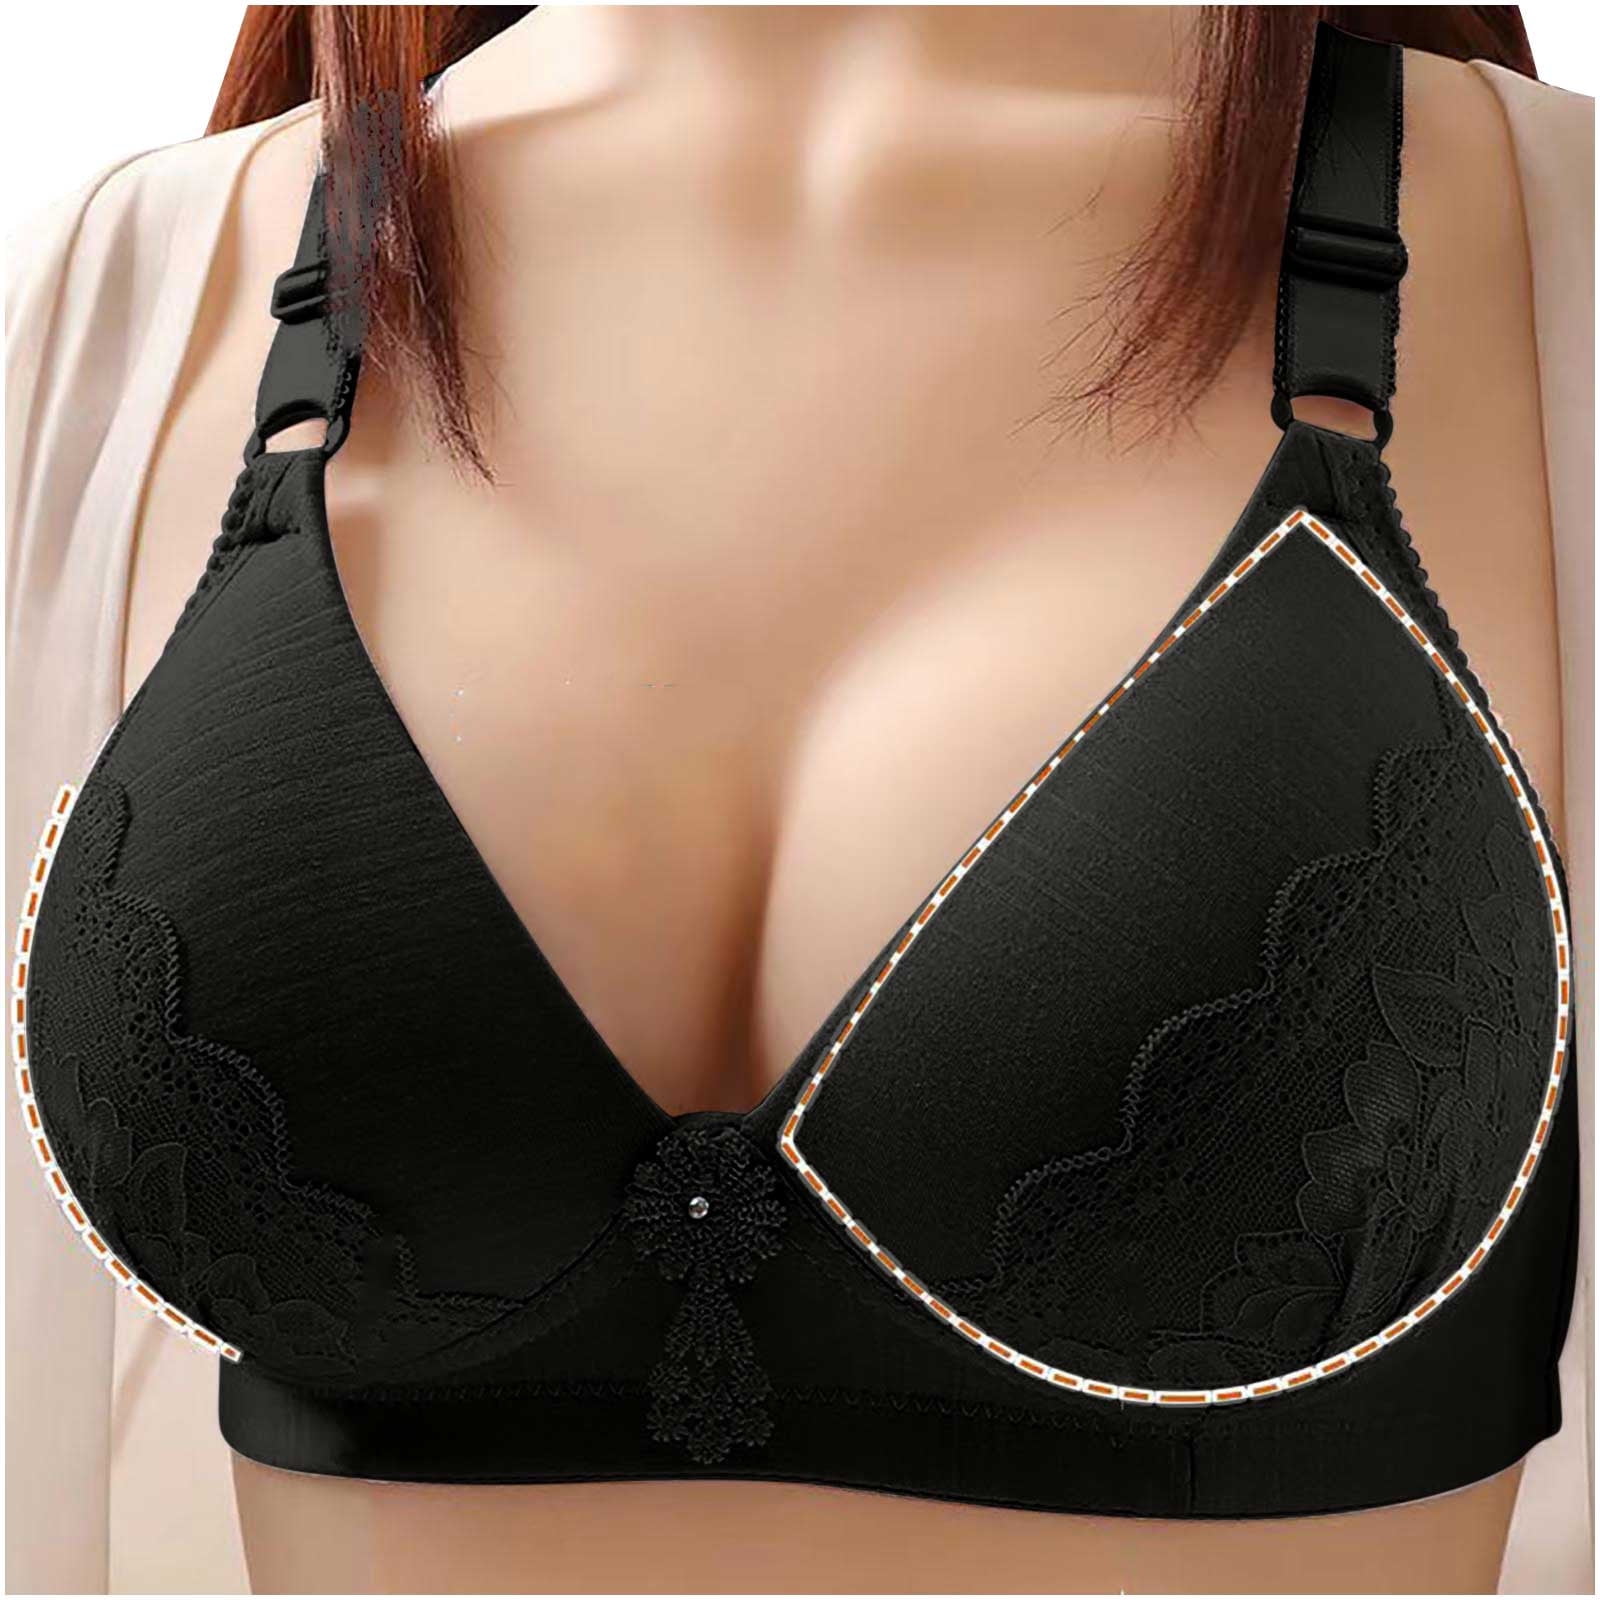 Mrat Clearance Sticky Bras for Women Clearance Women's Thin